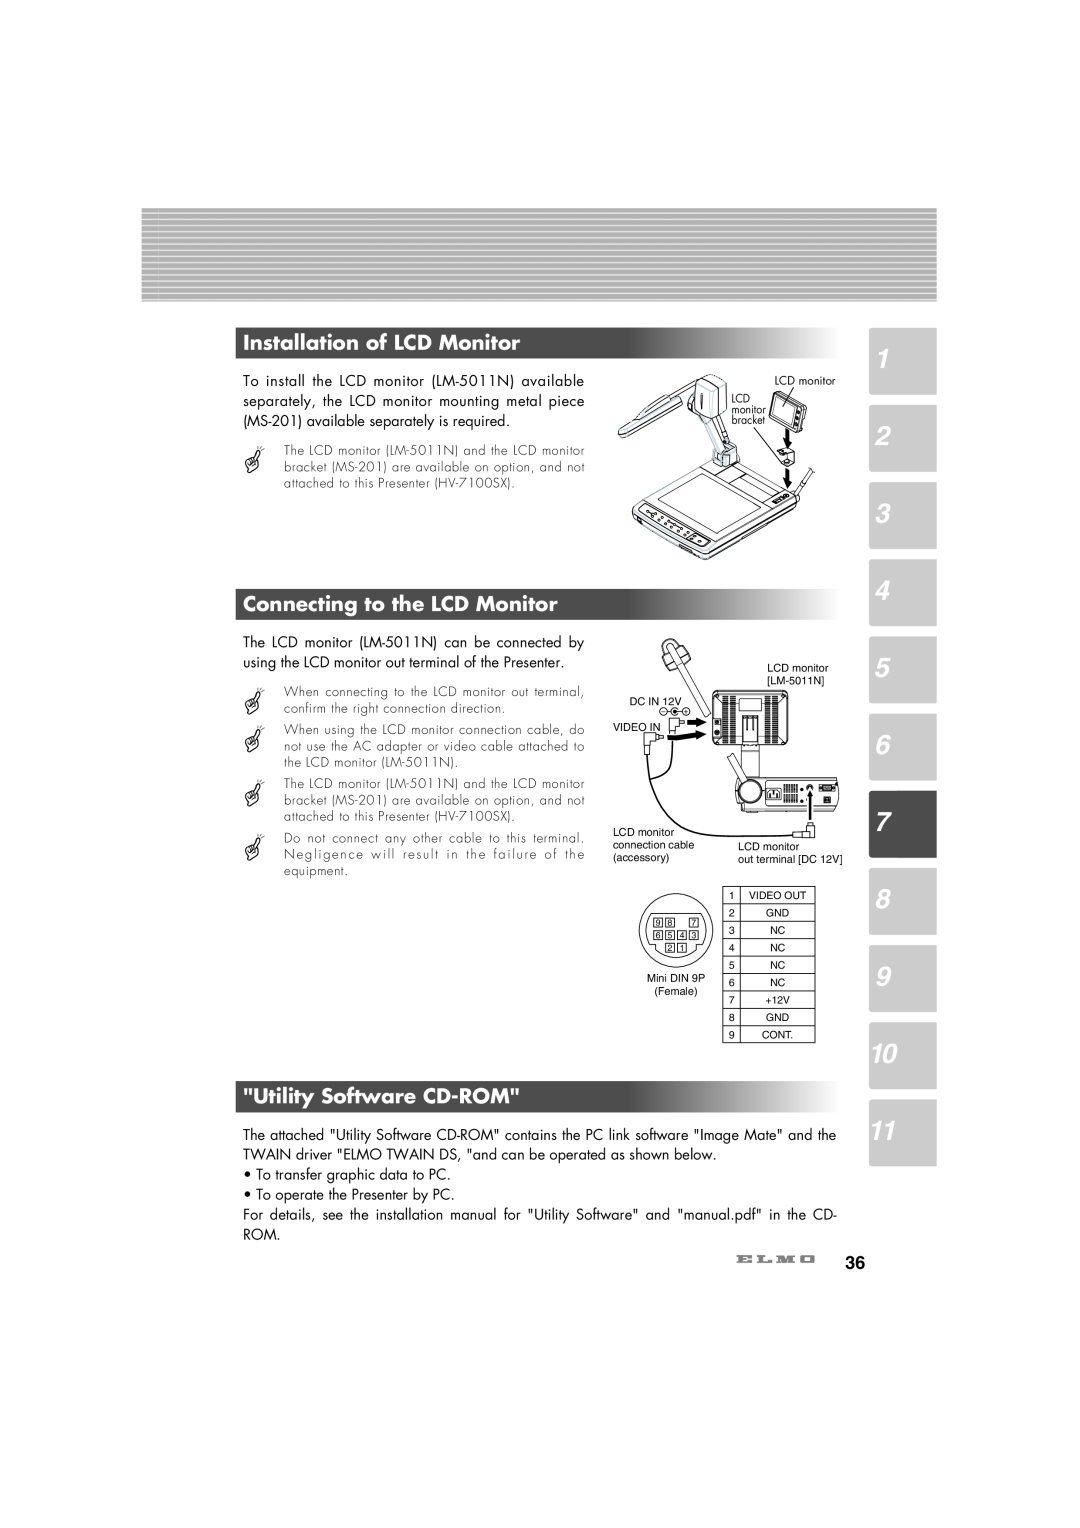 Elmo HV-7100SX instruction manual Installation of LCD Monitor, Connecting to the LCD Monitor, Utility Software CD-ROM 